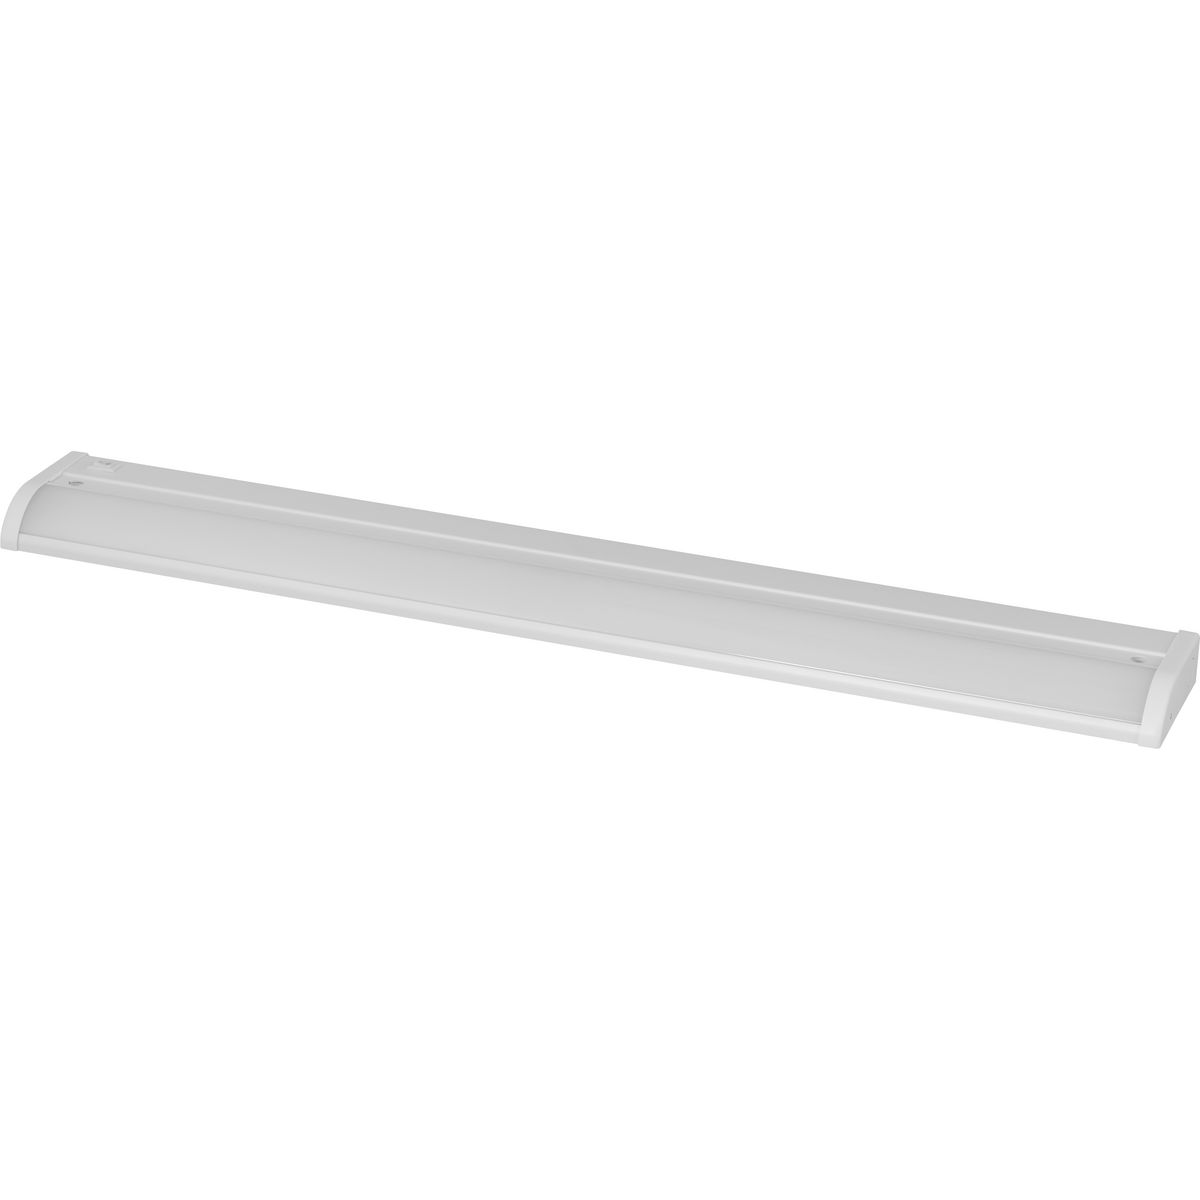 The HIDE-A-LITE V 23-1/2 in linear undercabinet fixture provides the ideal solution for residential and light commercial applications. Extruded aluminum construction featuring a lens design to optimizes light distribution to ensure proper illumination. The HIDE-A-LITE V series utilizes a simple mounting method, and direct wiring, for a hassle free installation. Energy efficient and functional lighting, which can be dimmed down to 10 percent with many Forward Phase Triac and Electronic Low Voltage ELV dimmers. 9 in linear undercabinet fixture. White powder coat finish.